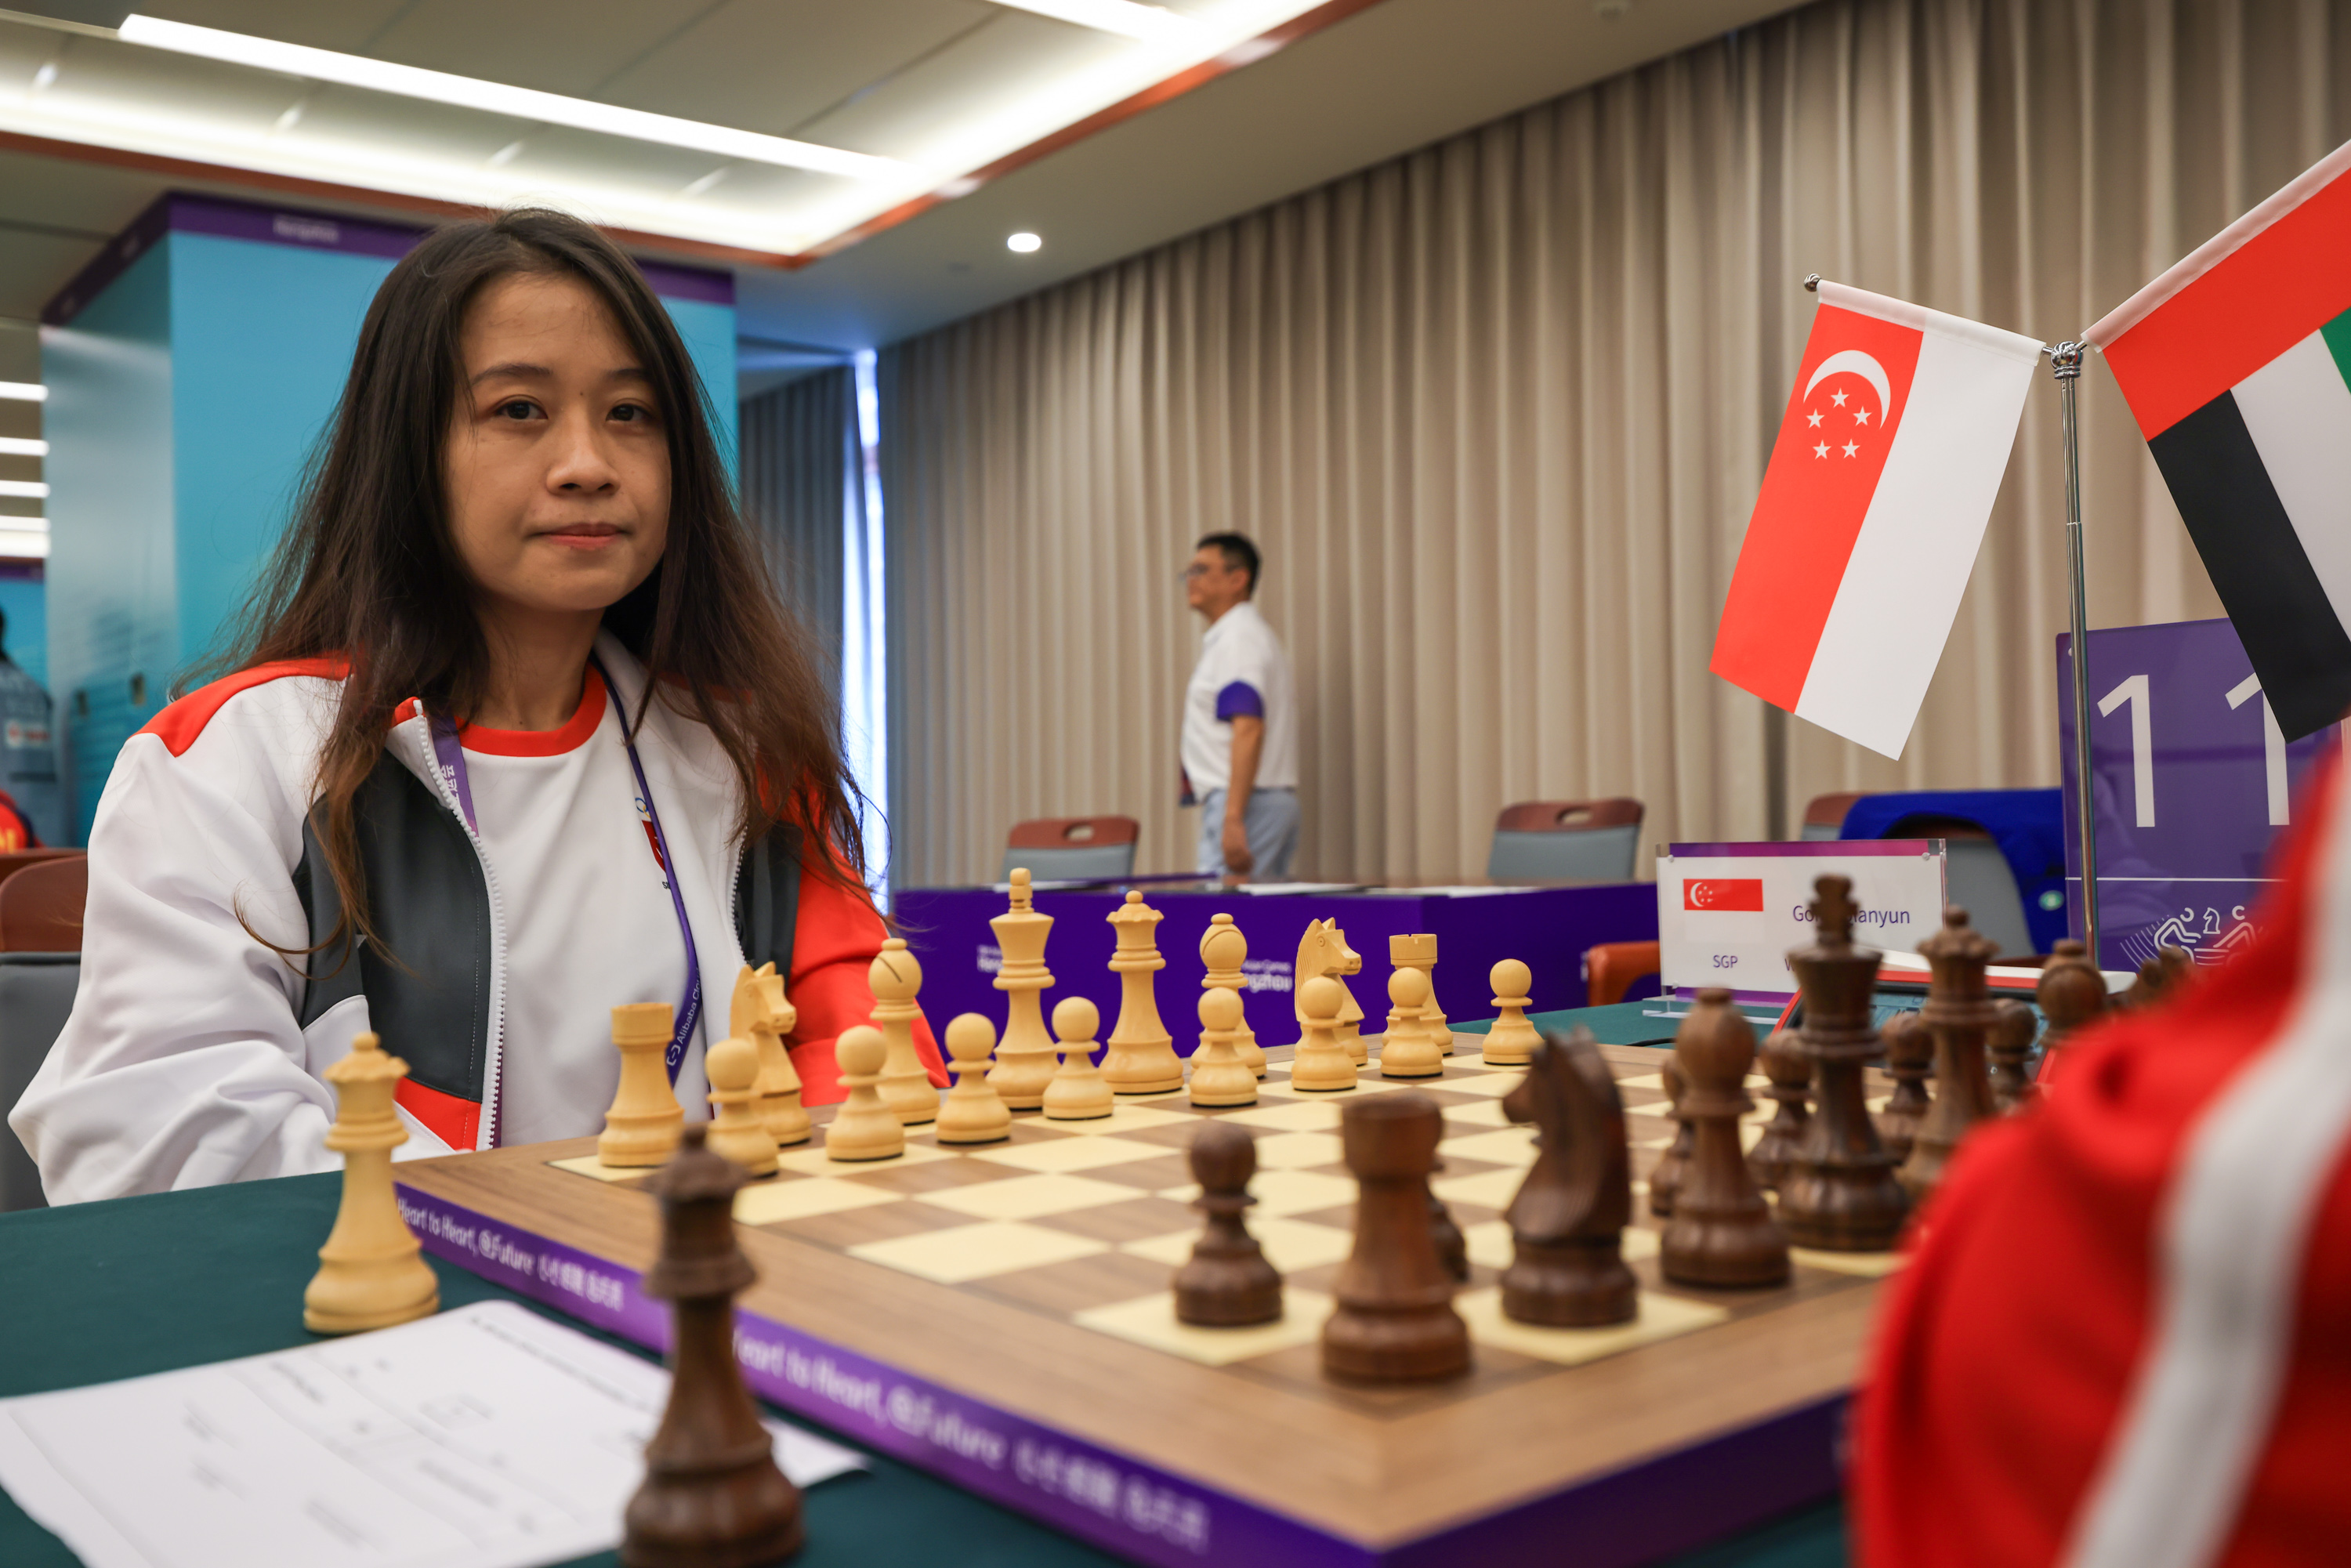 Hangzhou 2022: Gong hopes Chess can move back regularly into Asiad fold